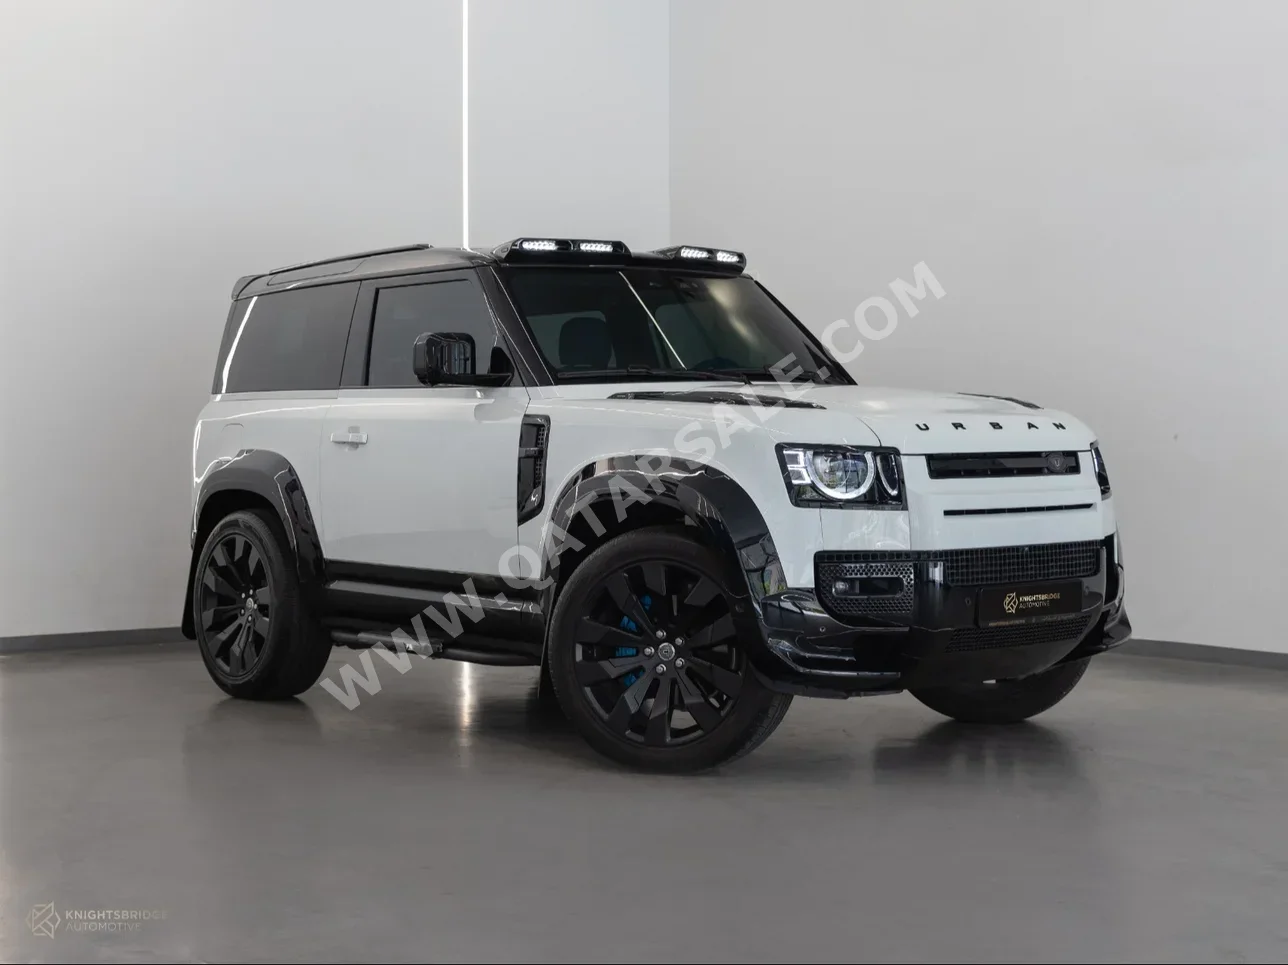  Land Rover  Defender  90 SE Urban  2023  Automatic  9,100 Km  6 Cylinder  Four Wheel Drive (4WD)  SUV  White  With Warranty